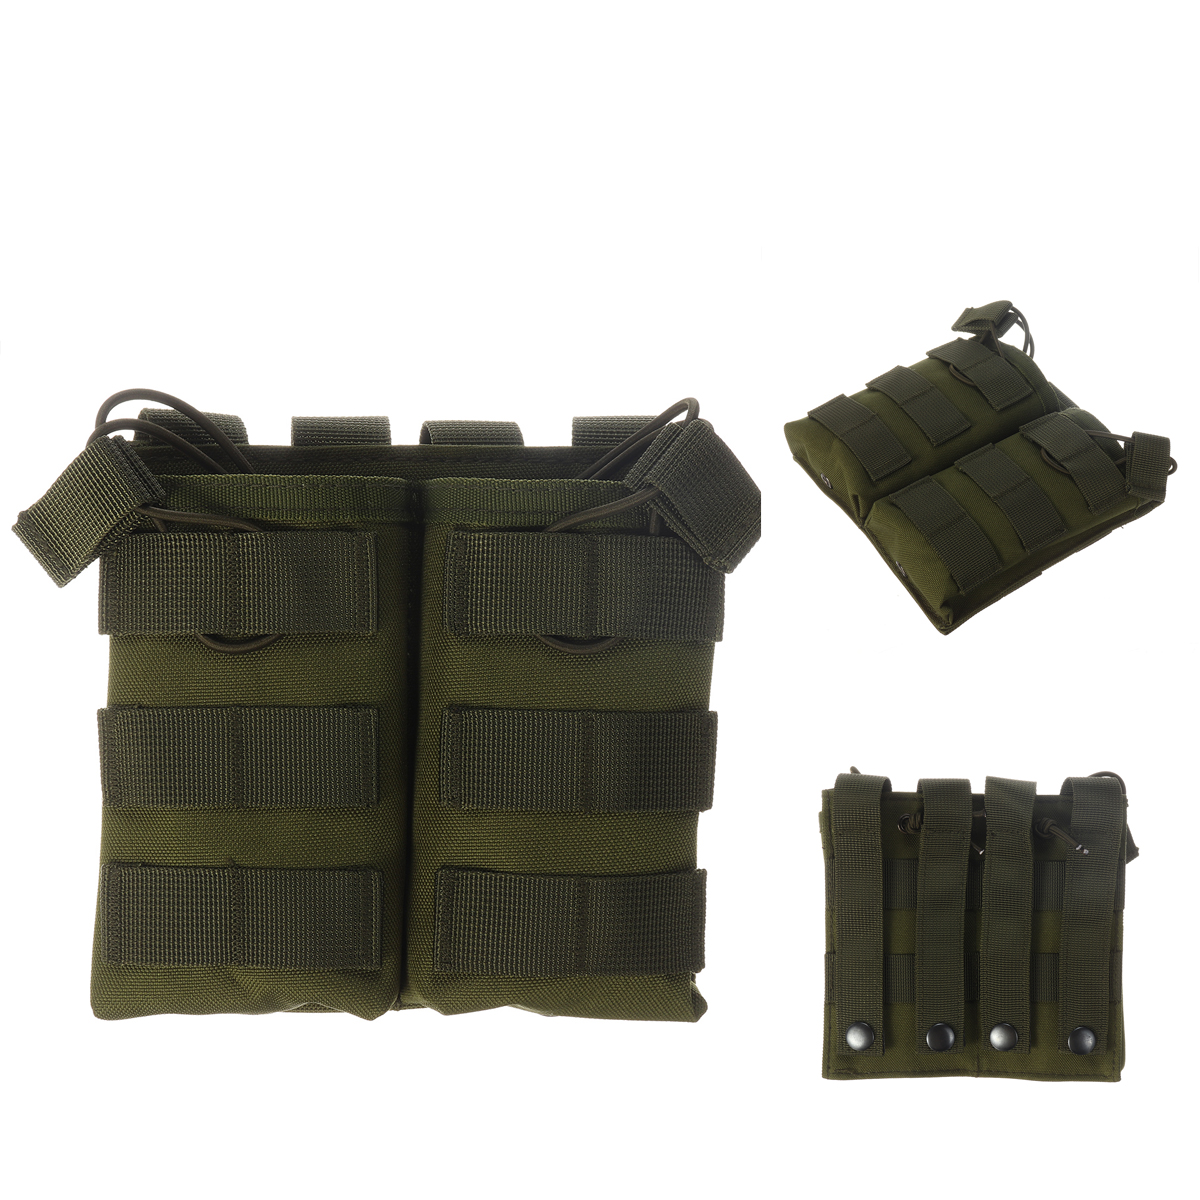 Tactical-M4-Magazine-Pouch-600D-Oxford-Double-MOLLEPALS-Fast-Mag-Pouches-For-Outdoor-Hiking-Hunting--1779790-6